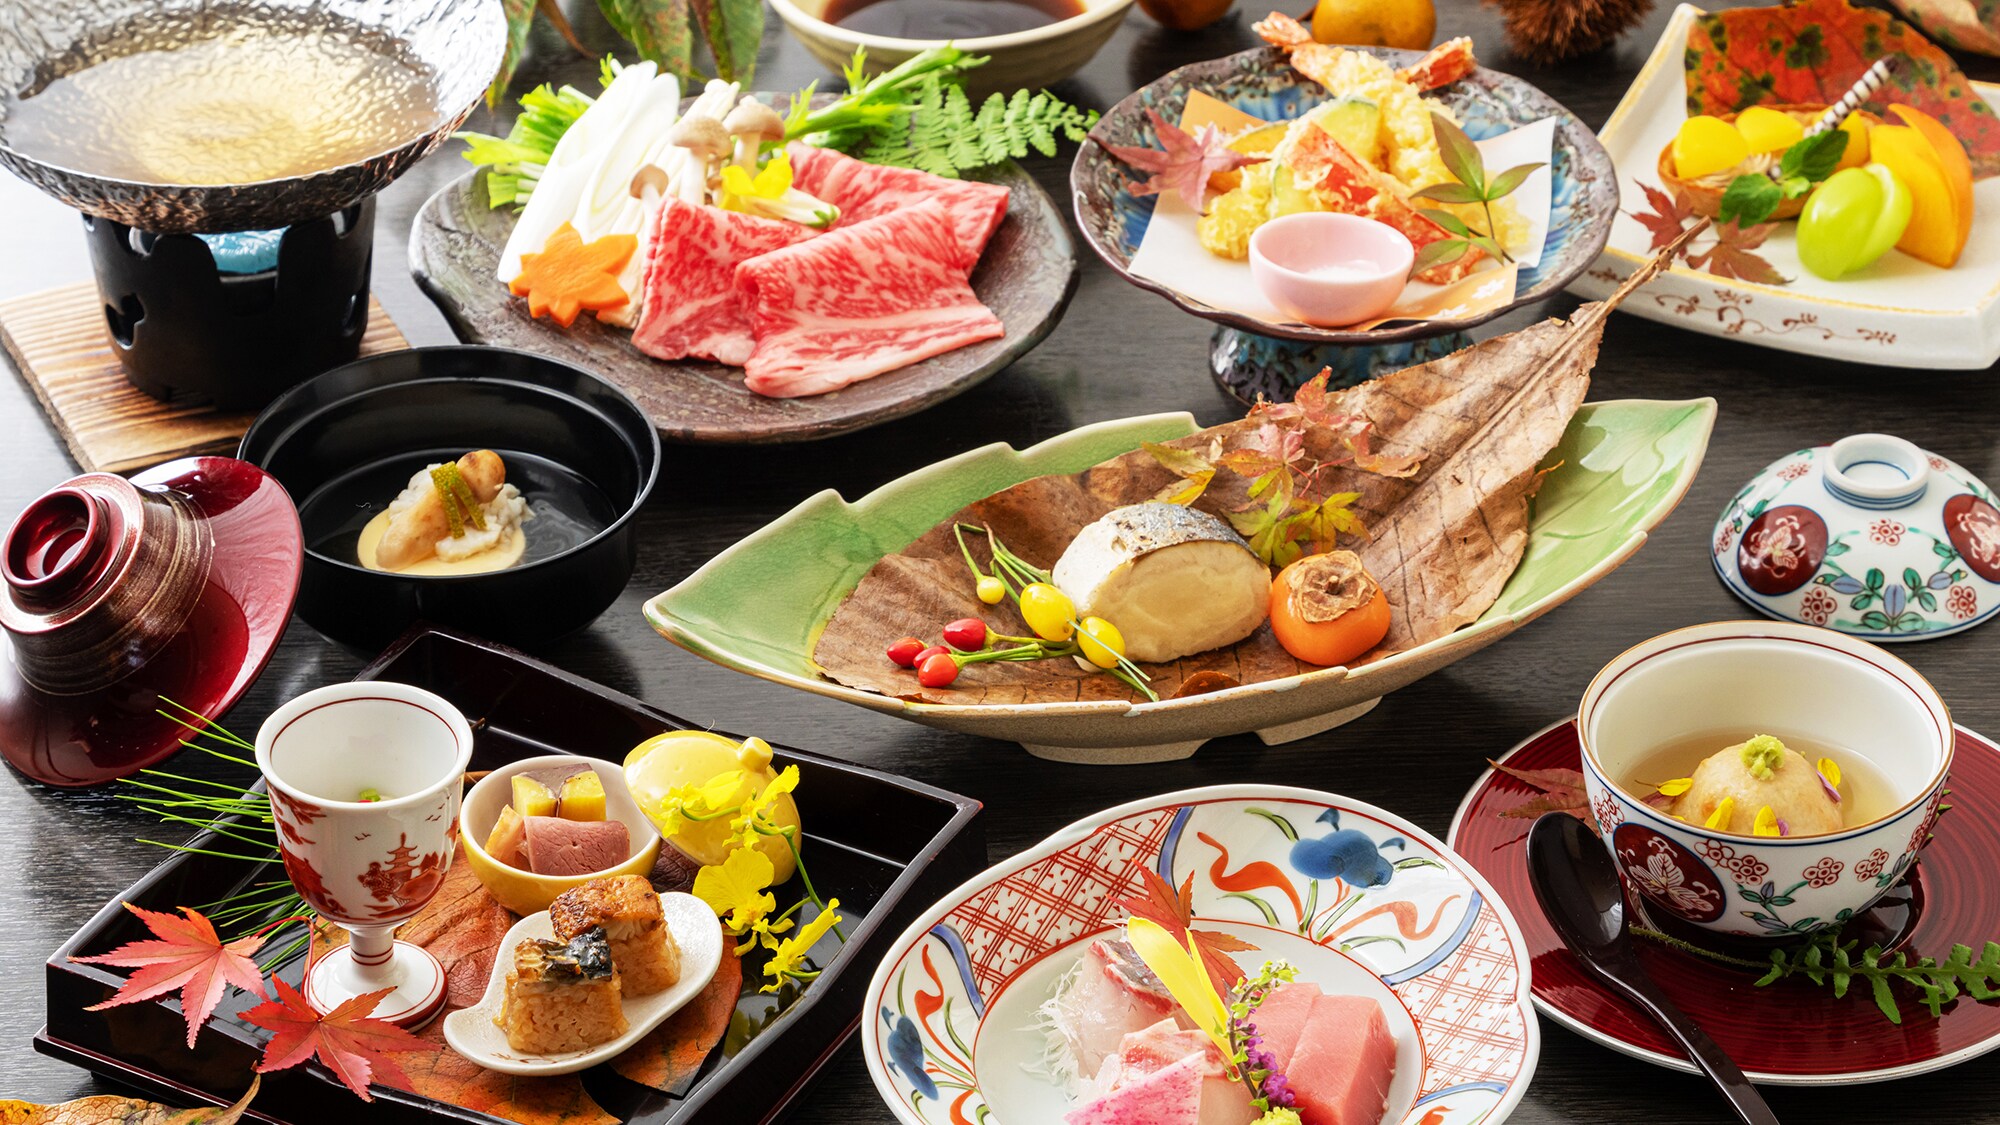 ◆ An example of standard kaiseki ◆ A gentle taste that permeates the body and spreads. The menu varies from season to season